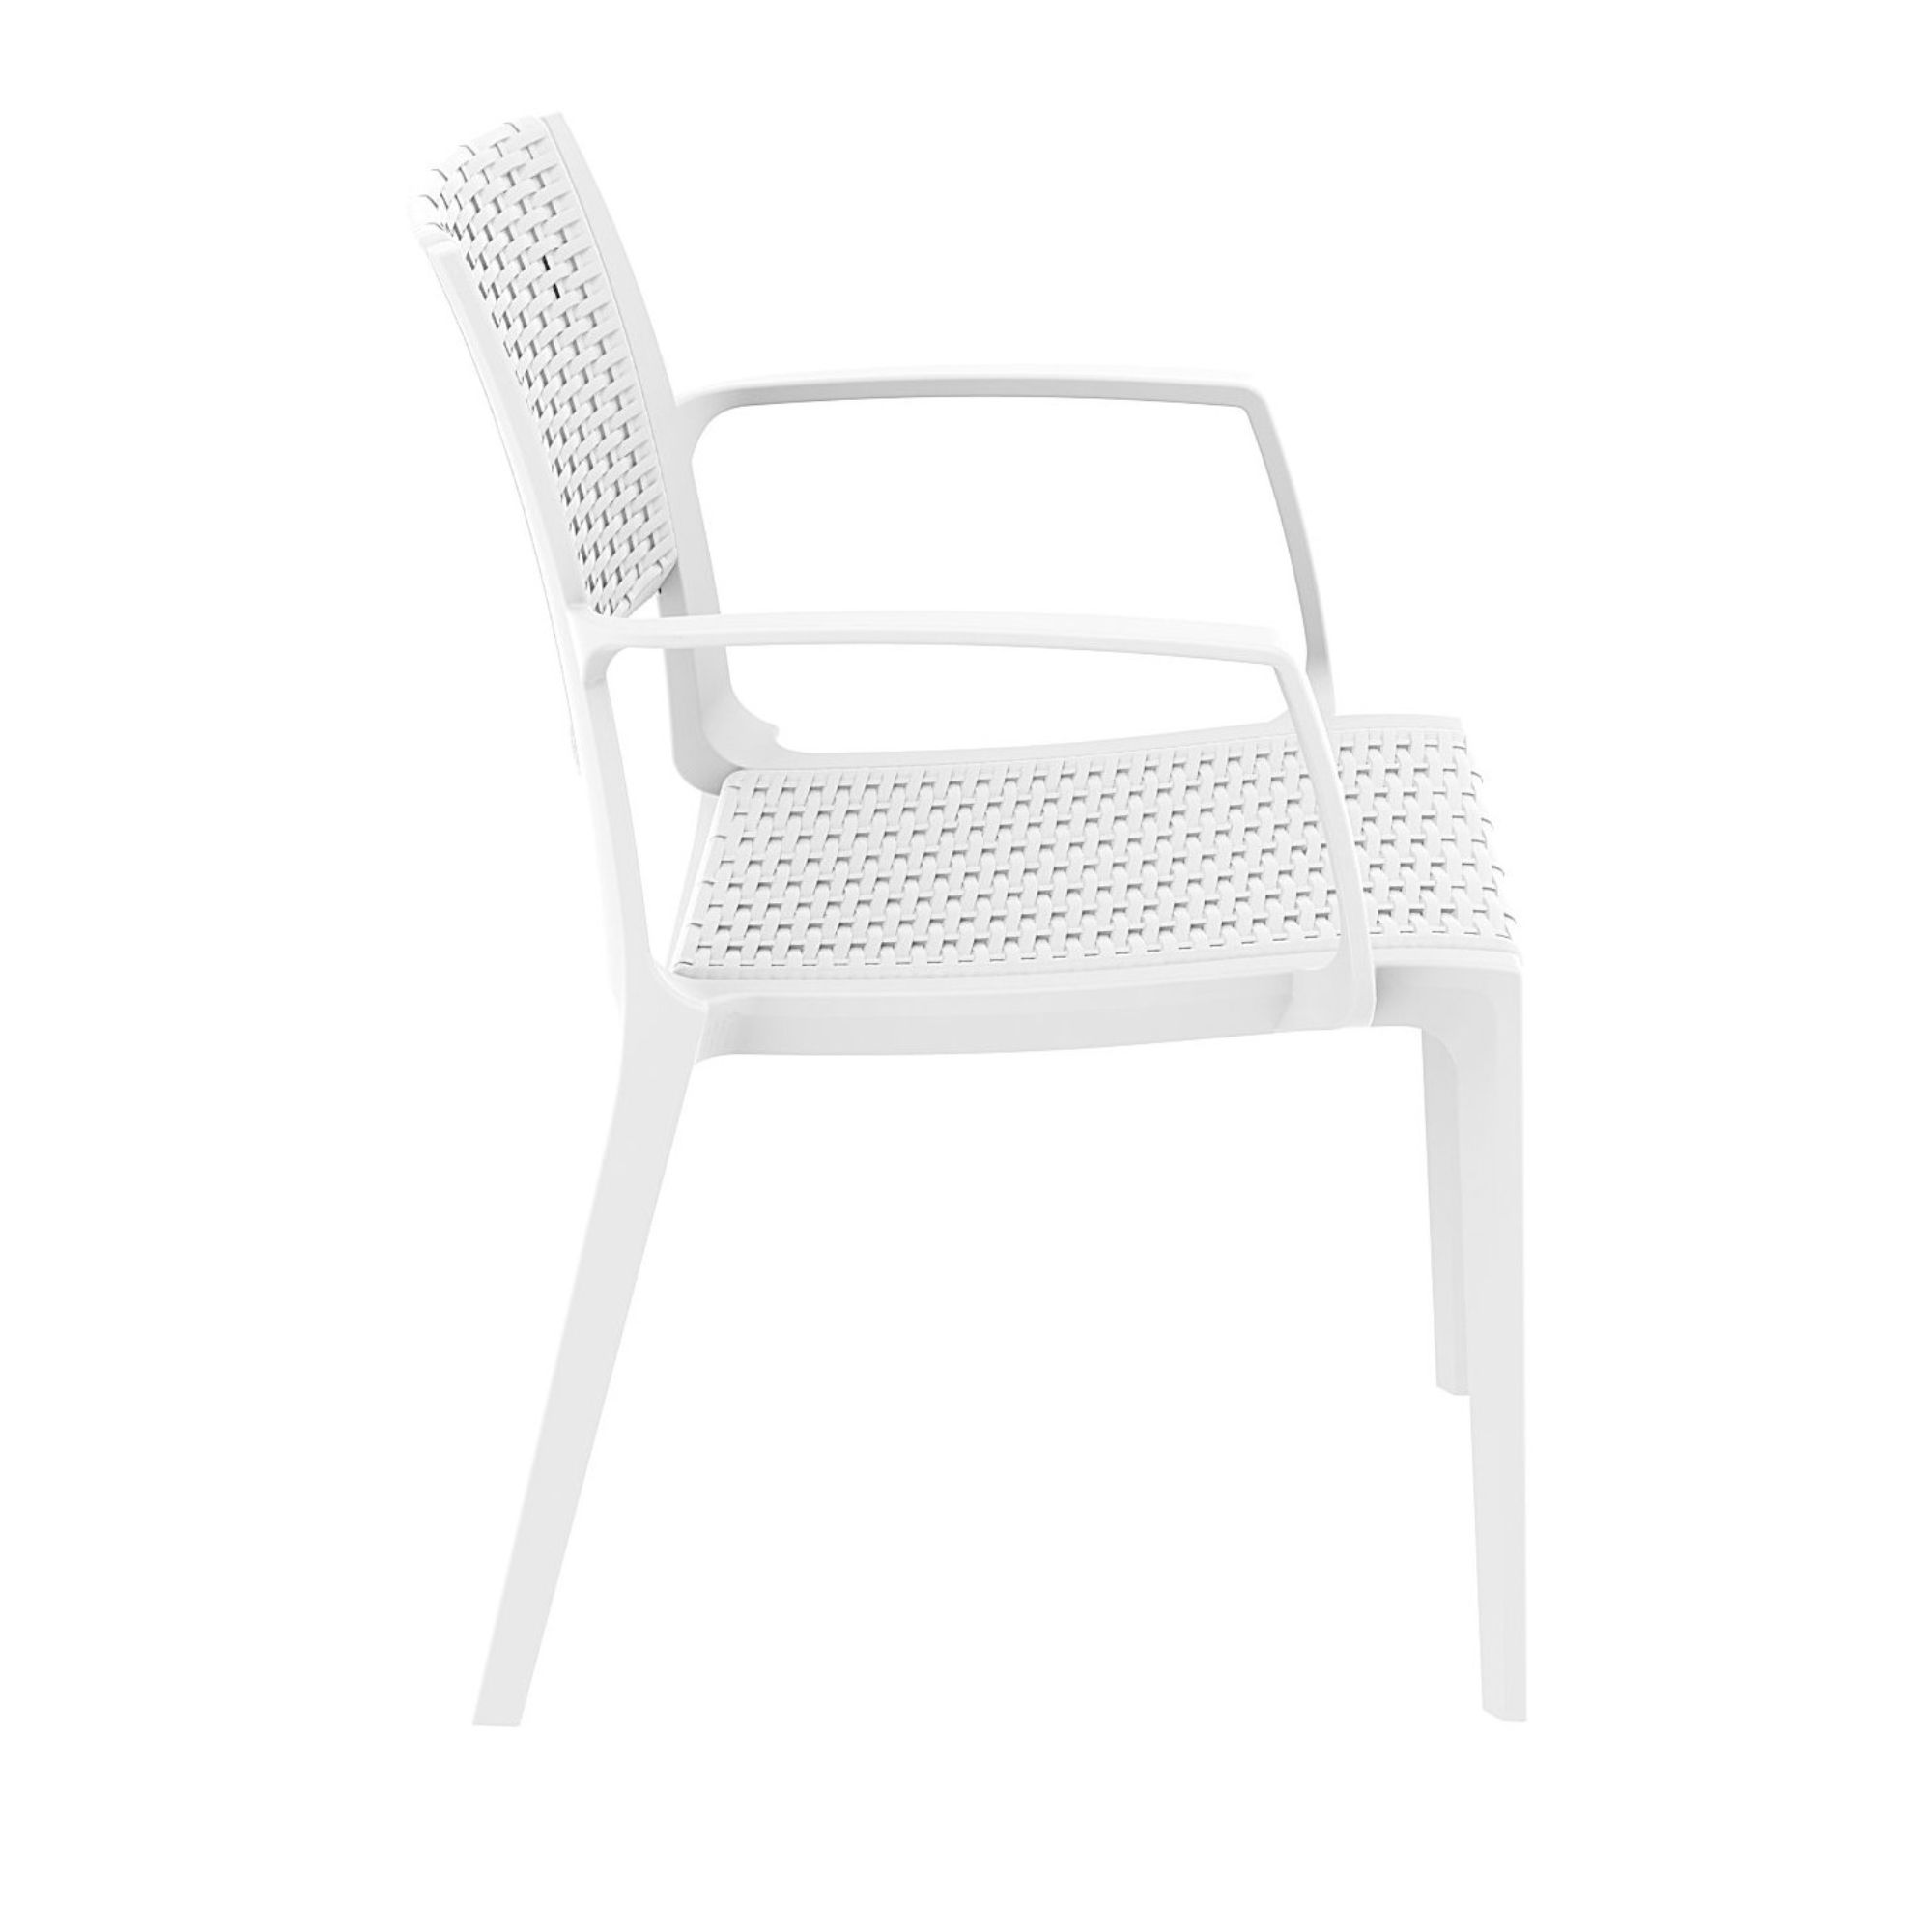 Luxury Commercial Living 32" White Outdoor Patio Wickerlook Dining Arm Chair - image 4 of 9